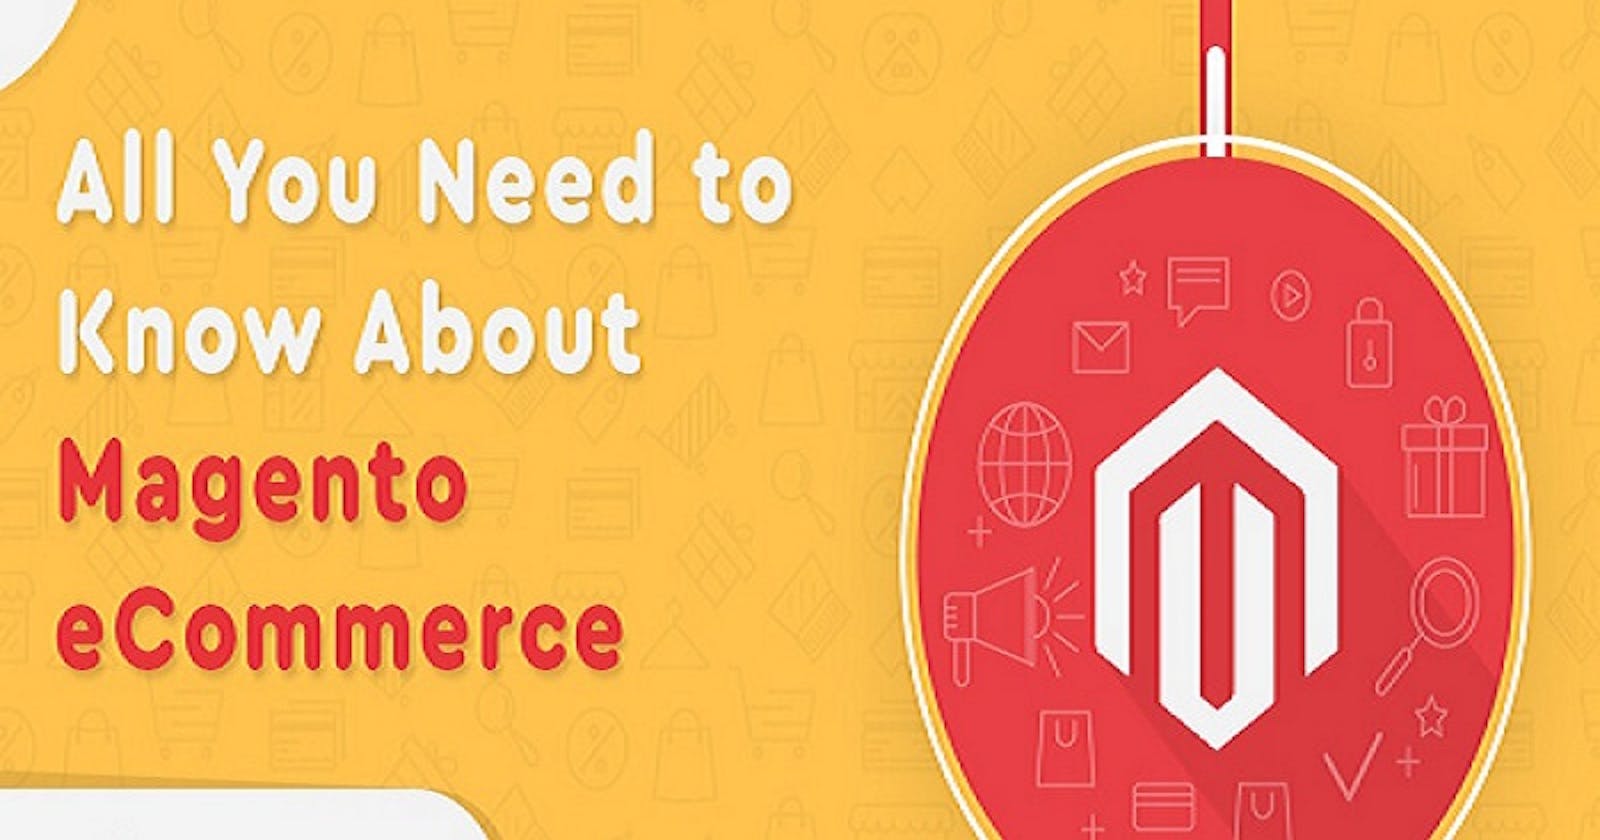 All You Need to Know About Magento eCommerce